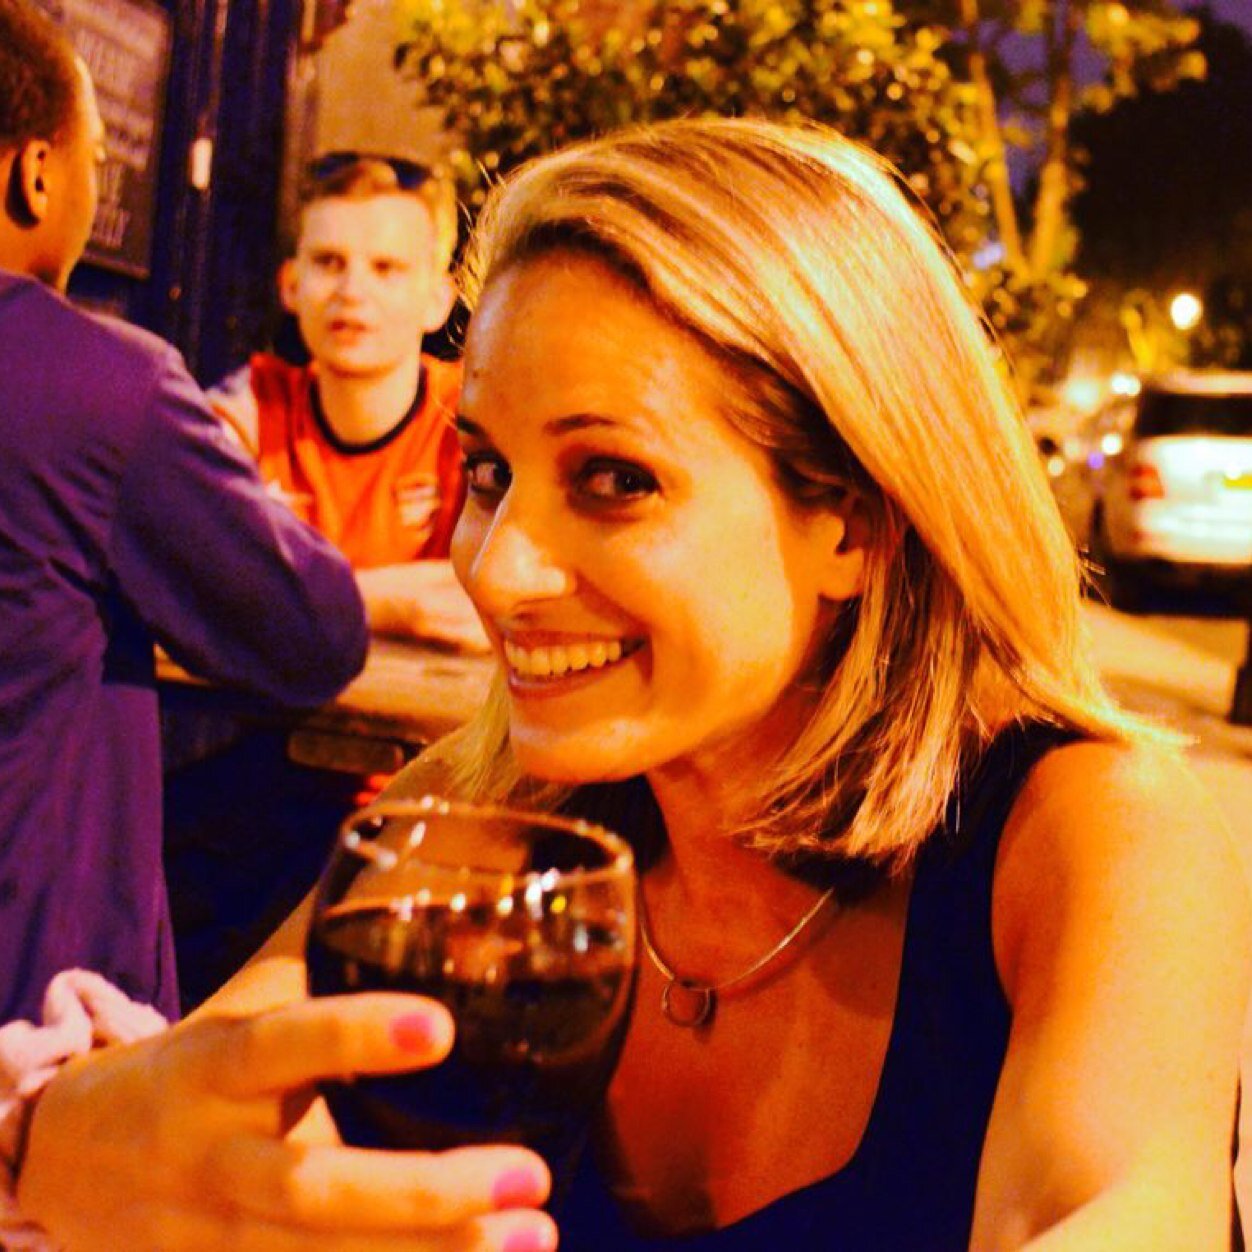 British lawyer turned Supper Club hostess, living in Tel Aviv since 2009.                                           Motto: Be the reason someone smiles:-)